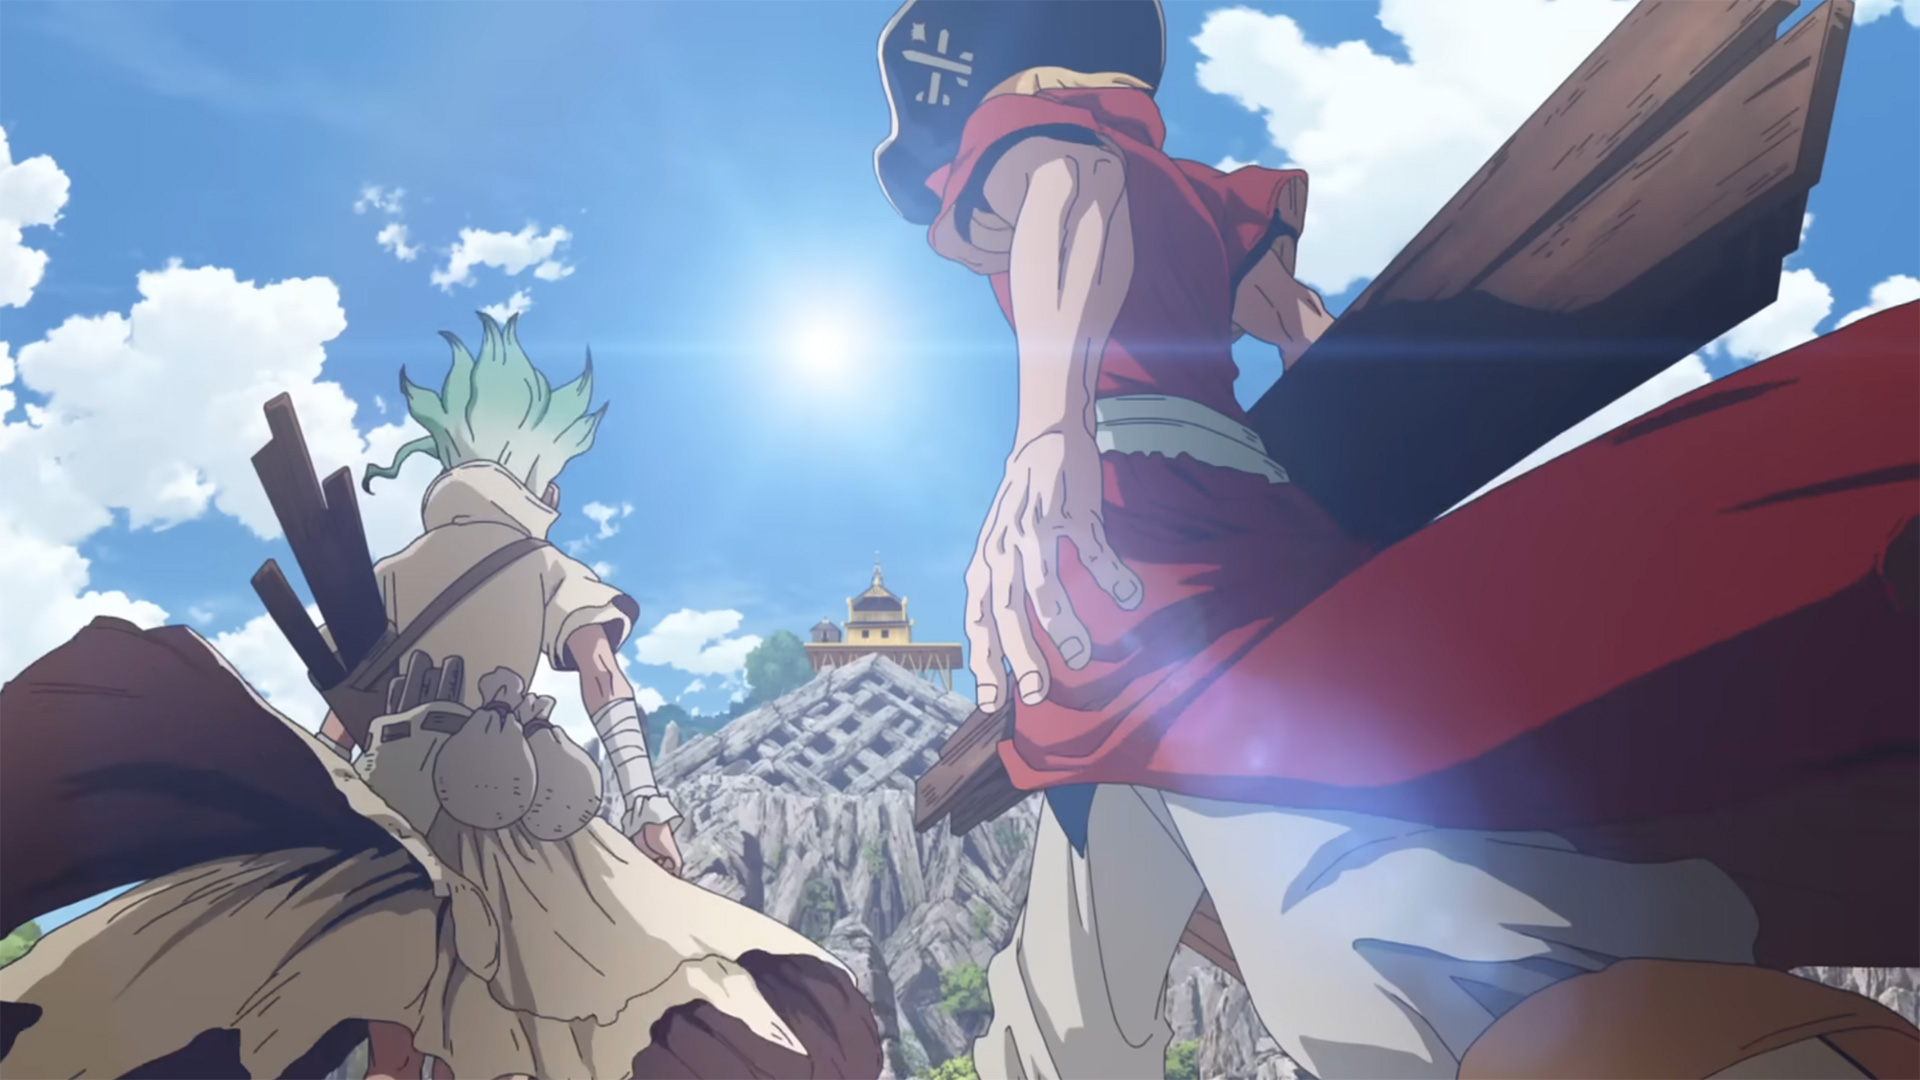 Dr. Stone: New World recebe poster promocional